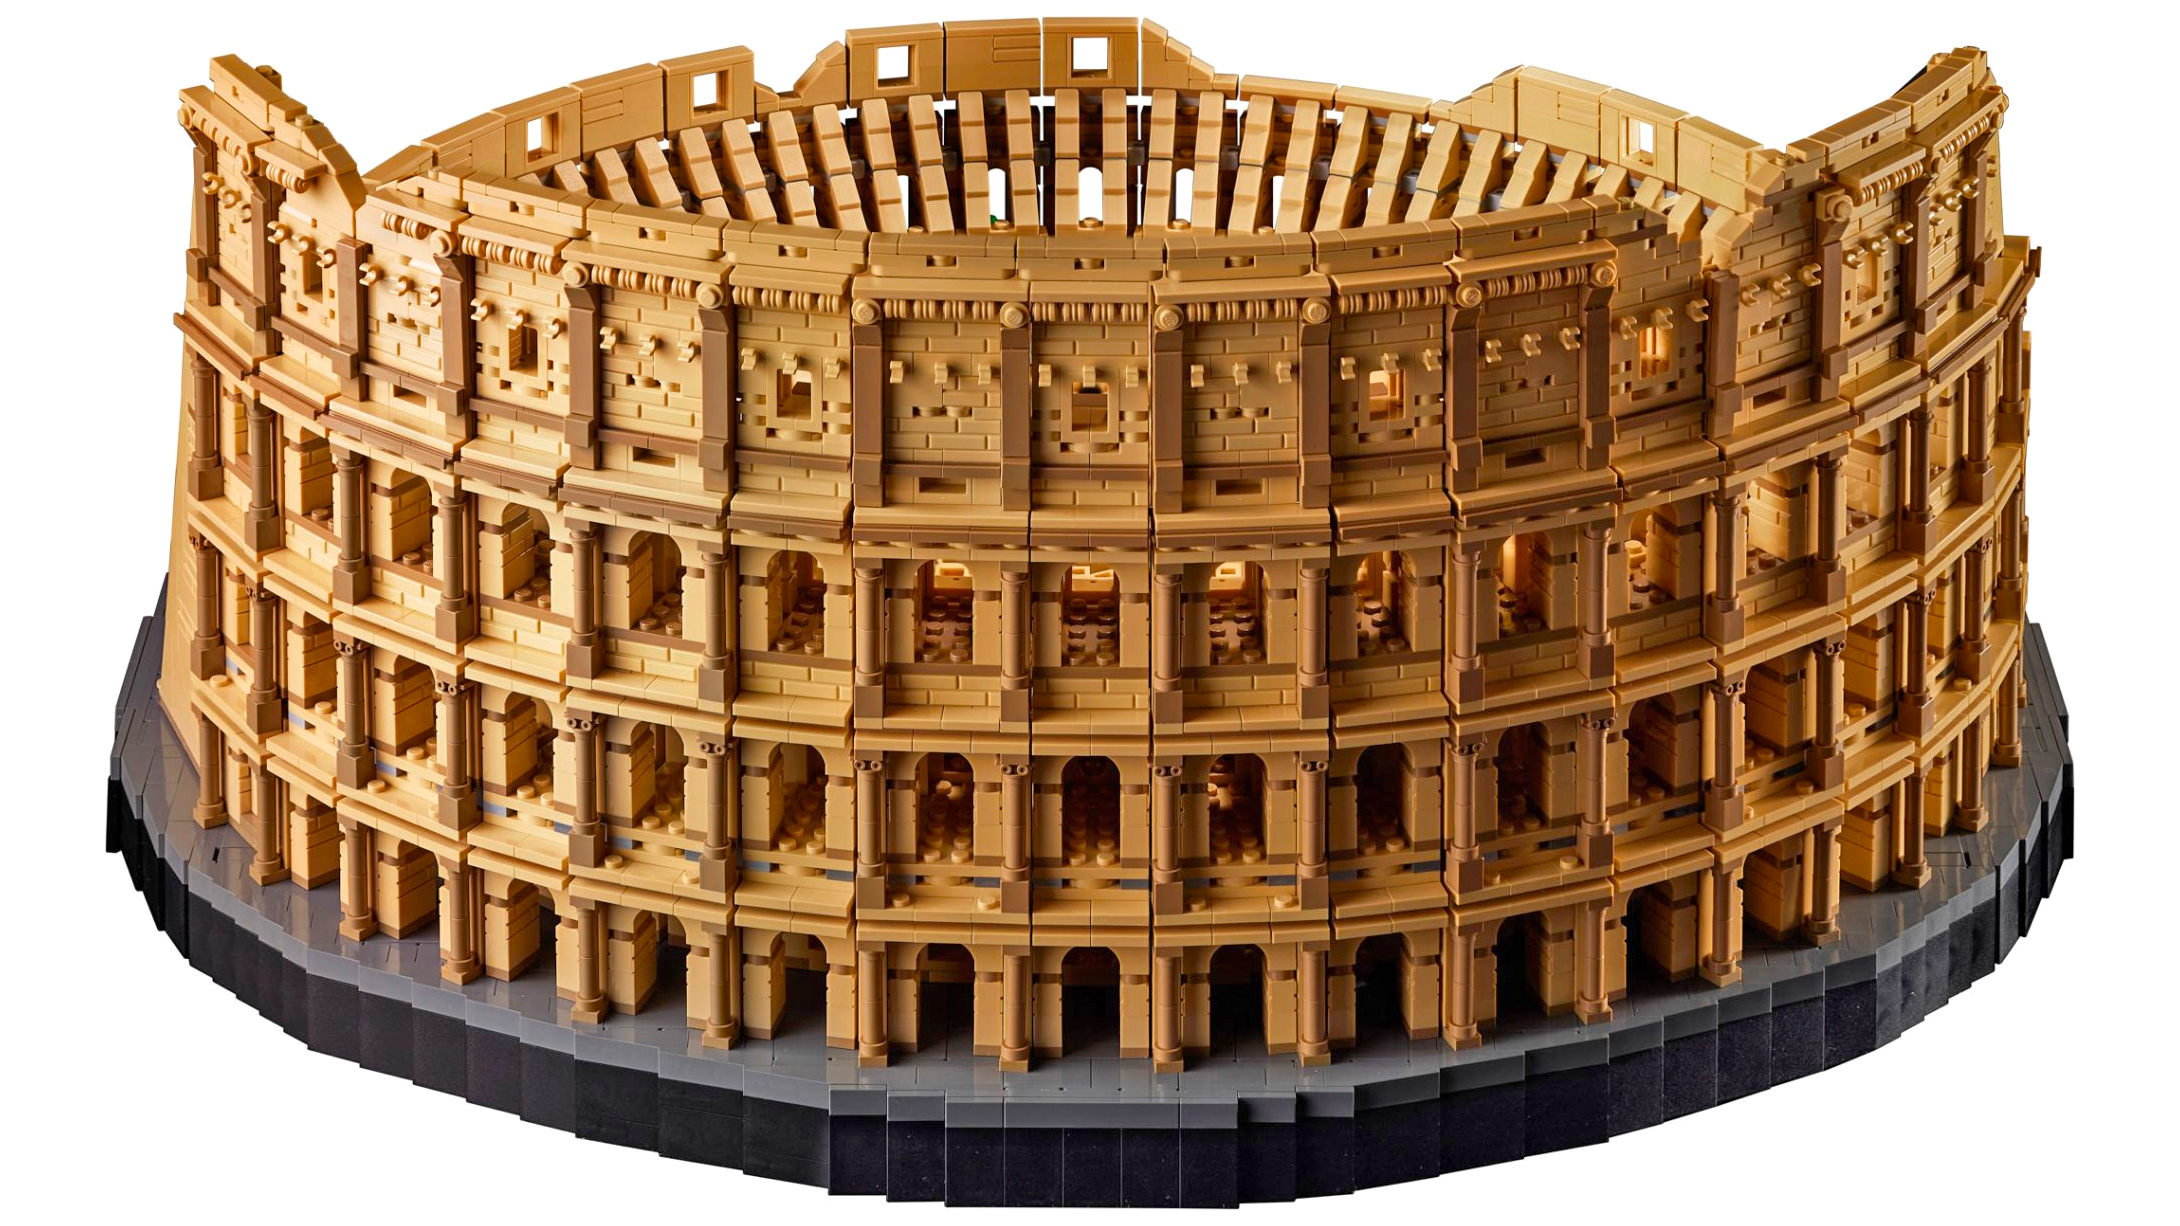 Users can display either the mostly complete northern wall of the Colosseum, or the southern side that's suffered more damage over the centuries. (Image: Lego)